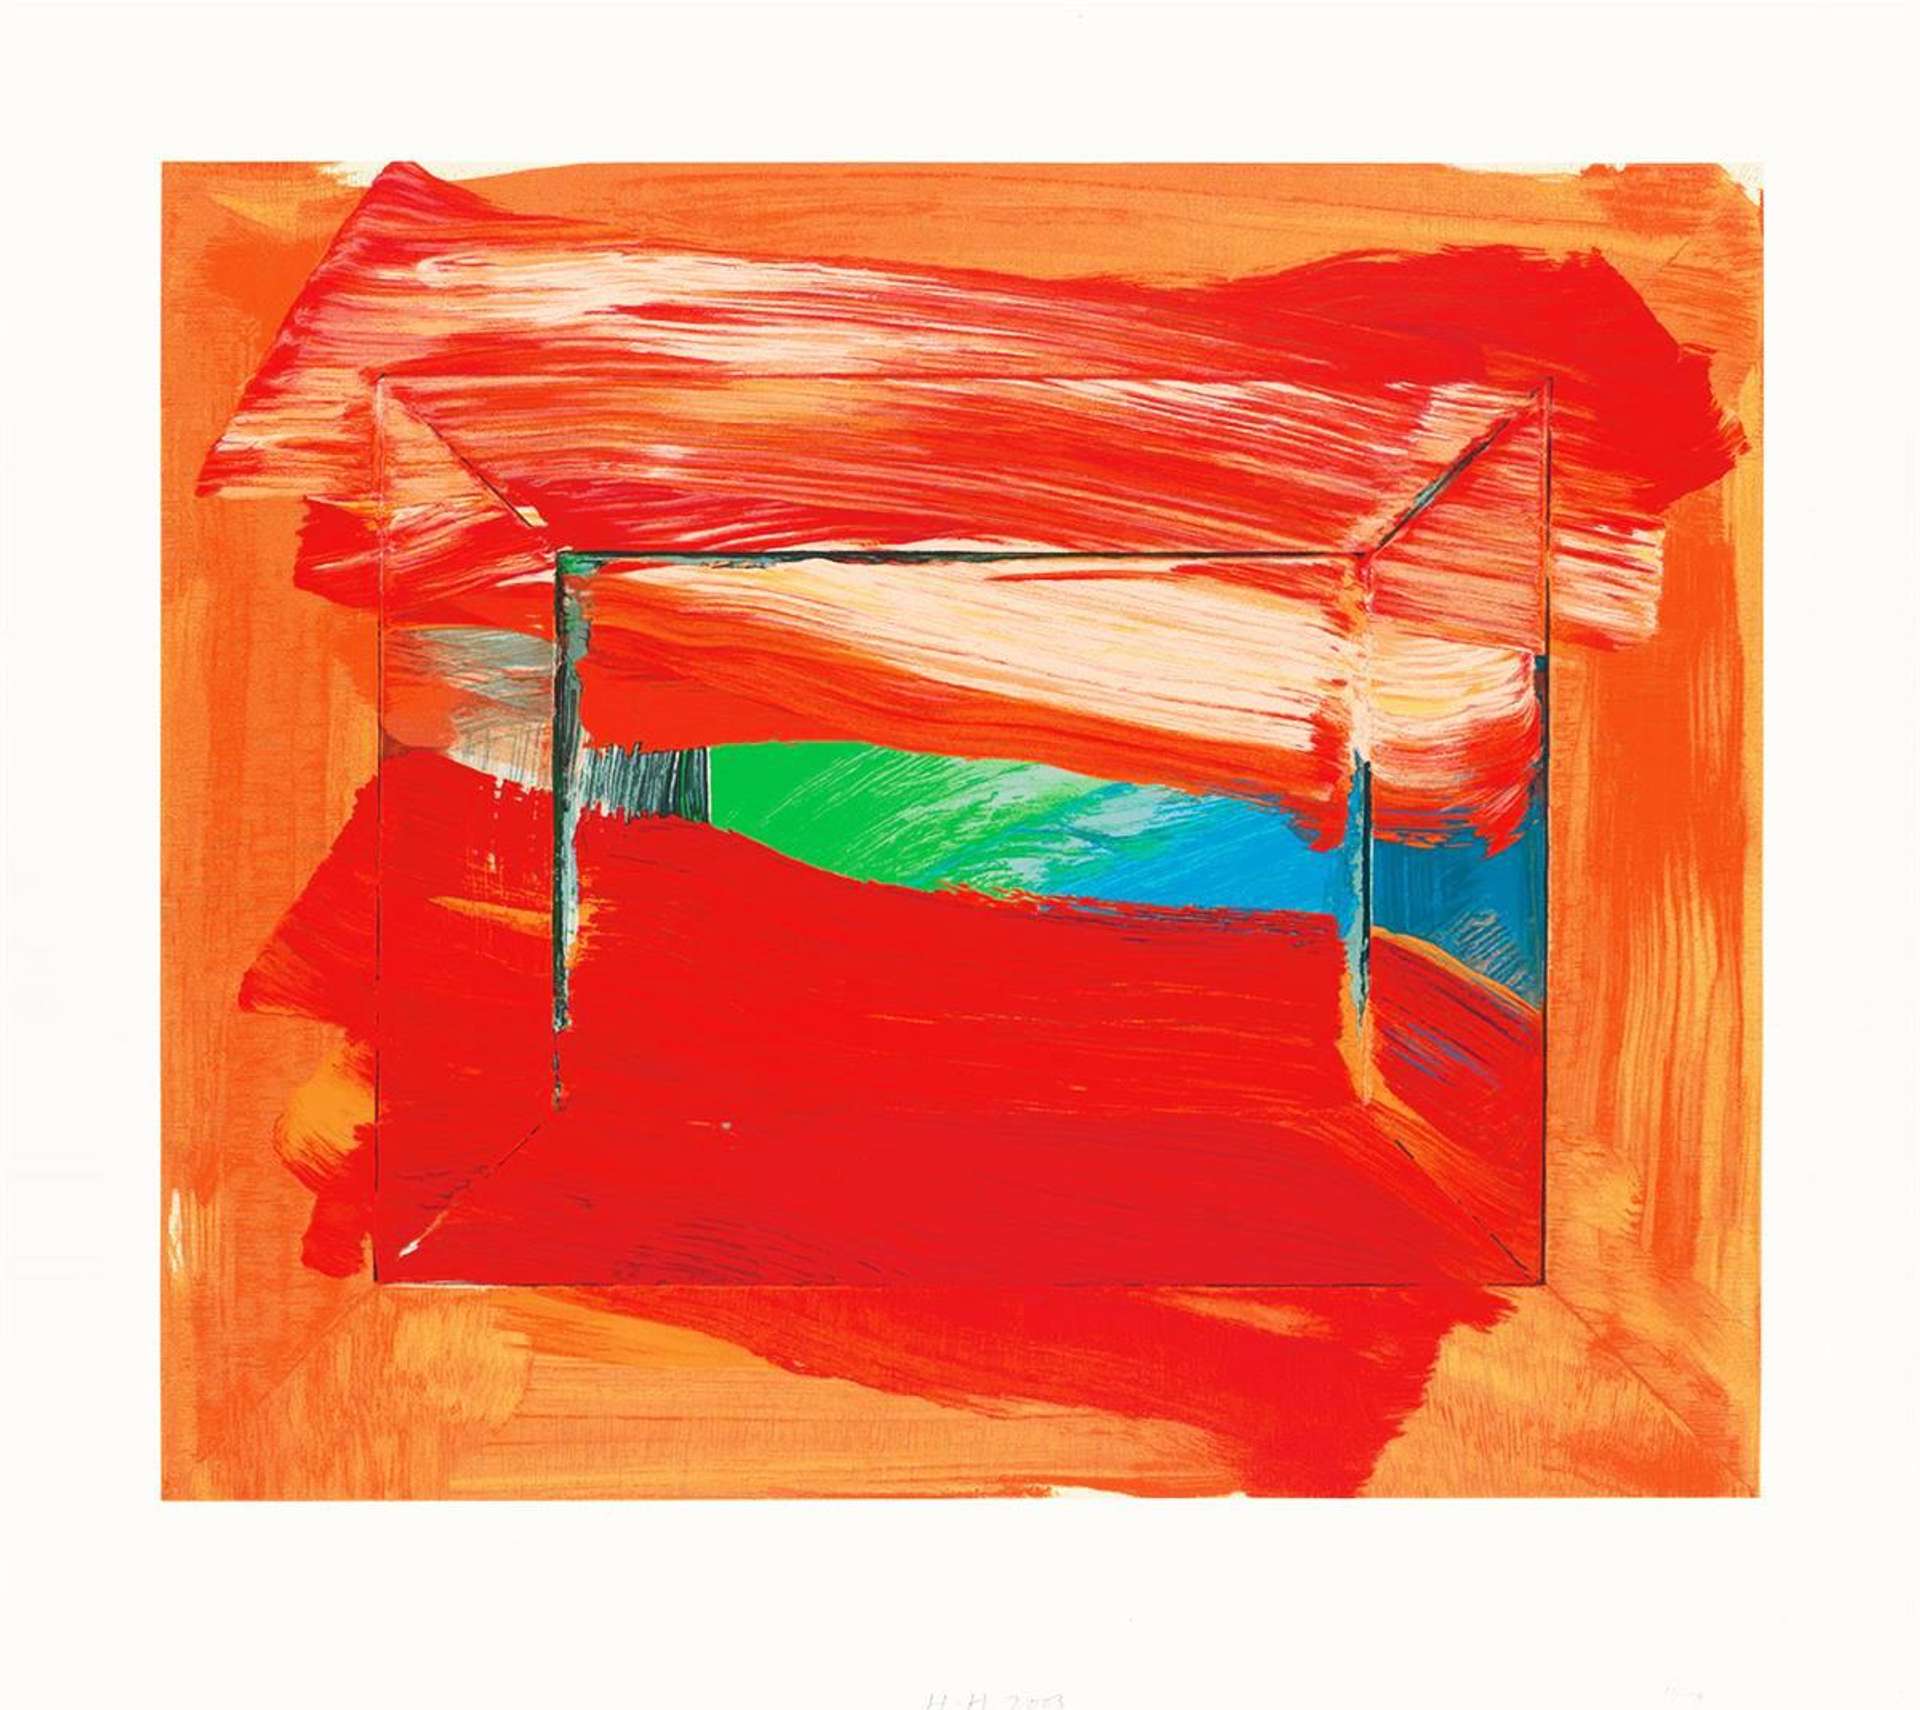 Howard Hodgkin Value: Top Prices Paid at Auction